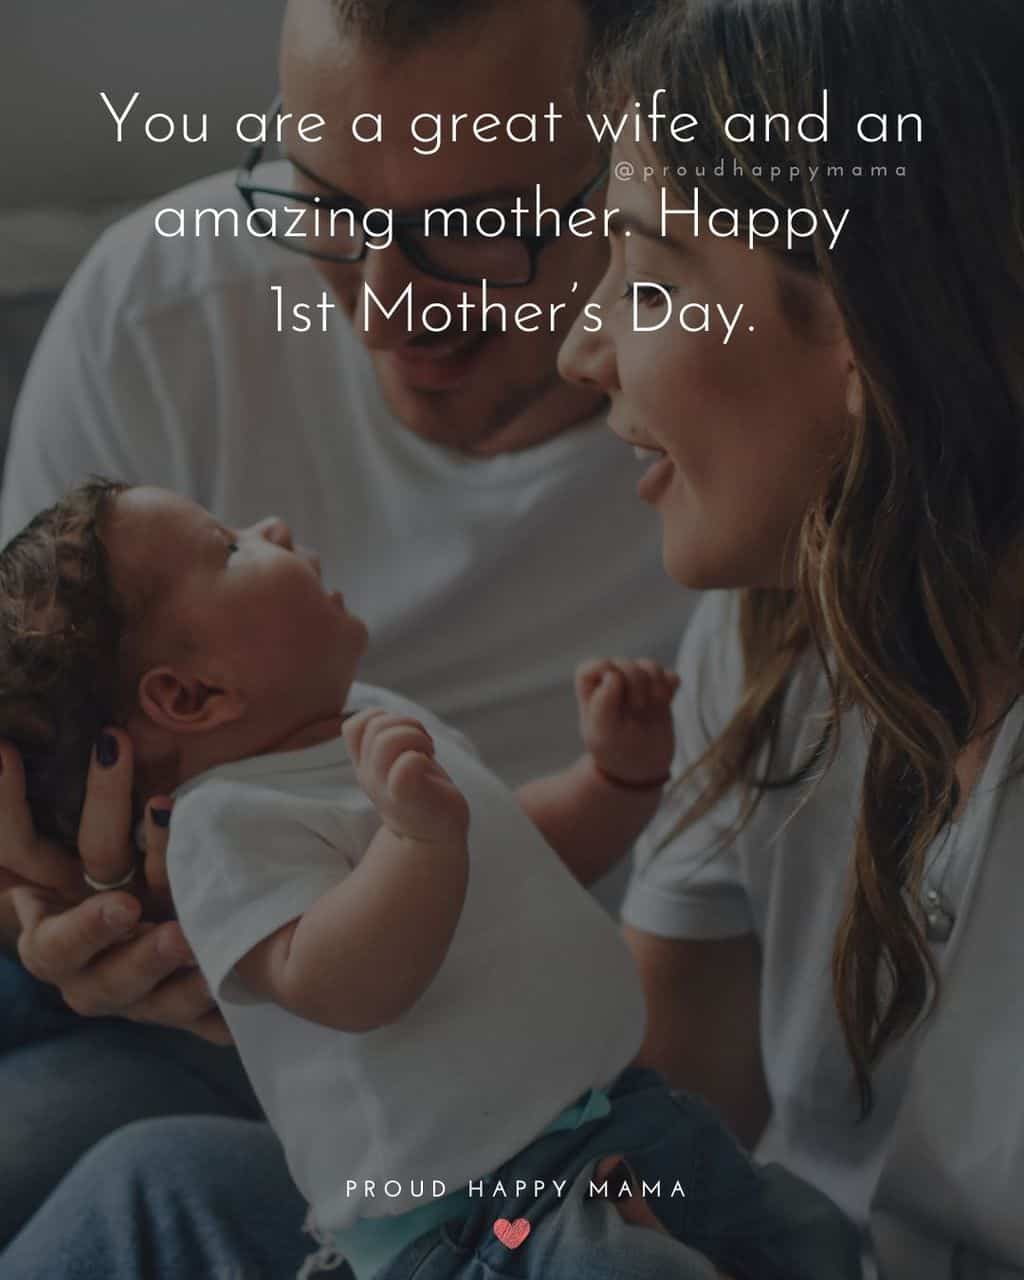 First Mothers Day Quotes - You are a great wife and an amazing mother. Happy 1st Mother’s Day.’